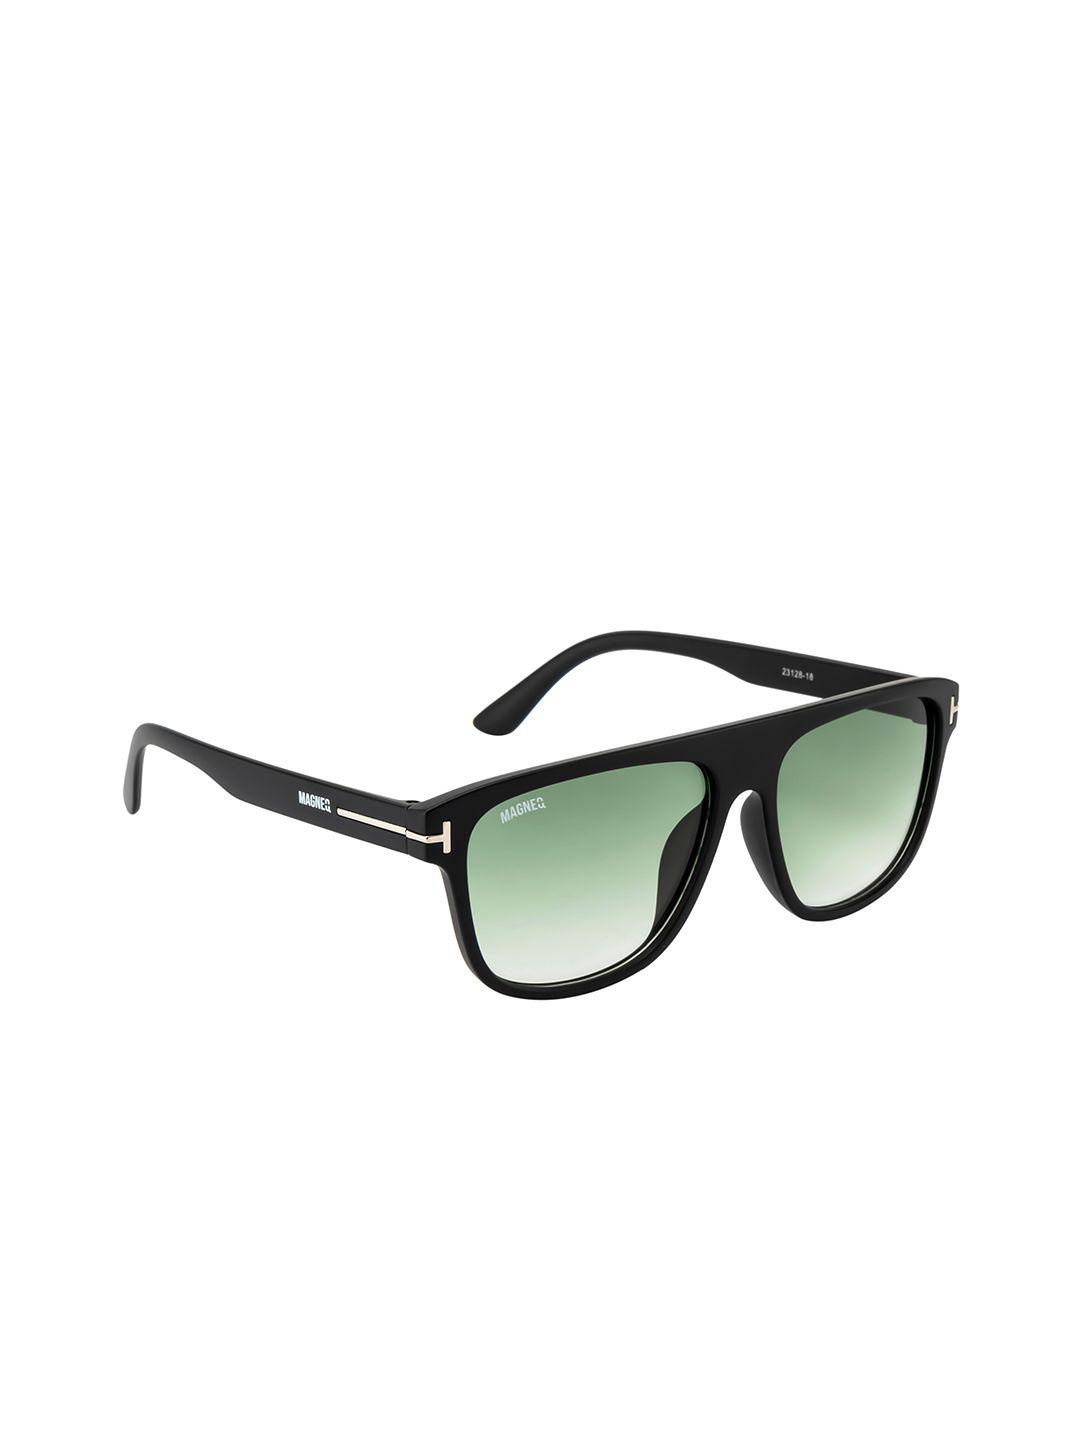 magneq lens & aviator sunglasses with polarised & uv protected lens mg 23128/s c4 5618